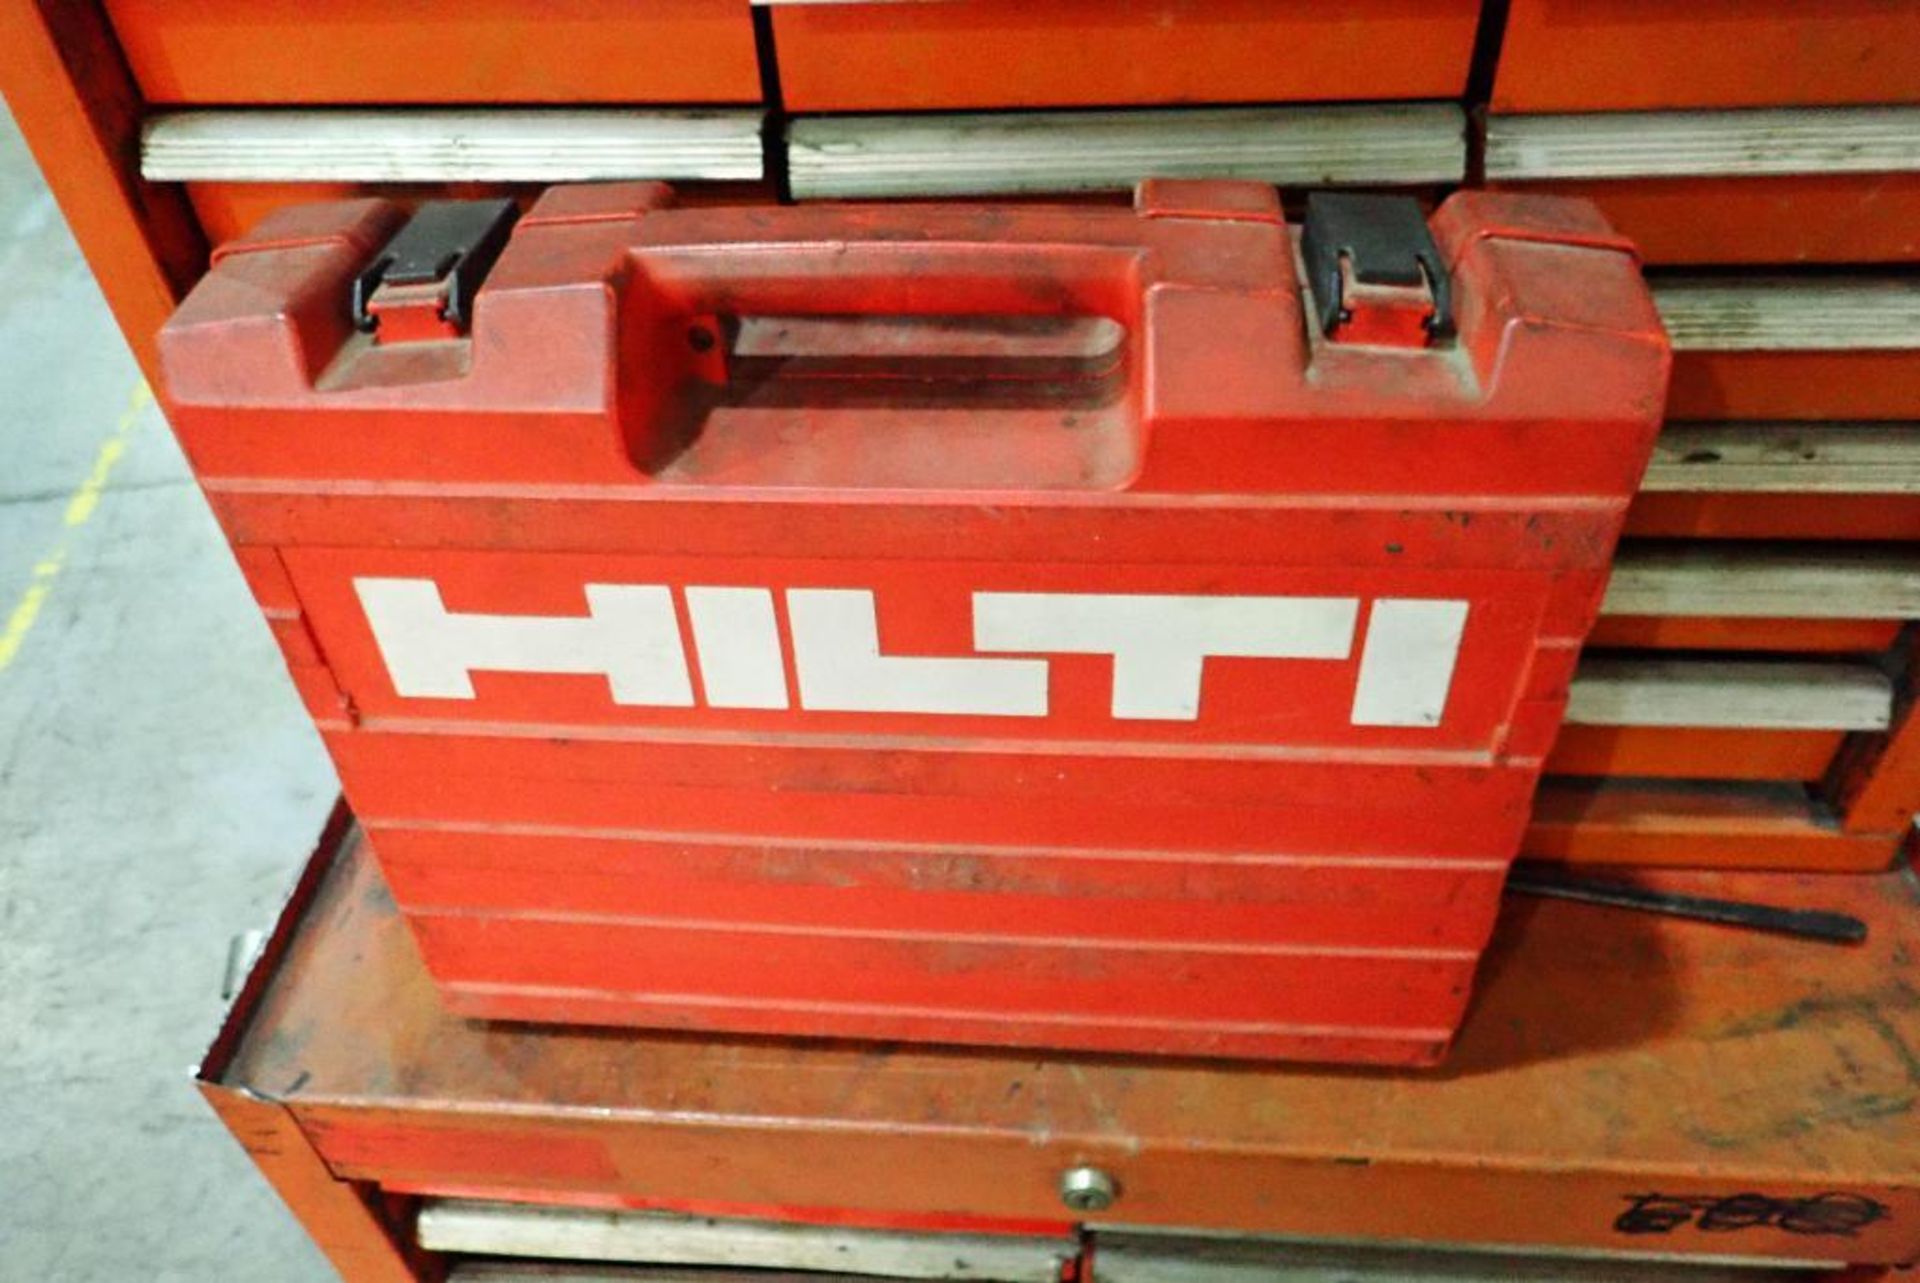 (2) tool chests with contents, wrenches, sockets, drill bits screw drivers, air tools, hammers, plie - Image 16 of 31